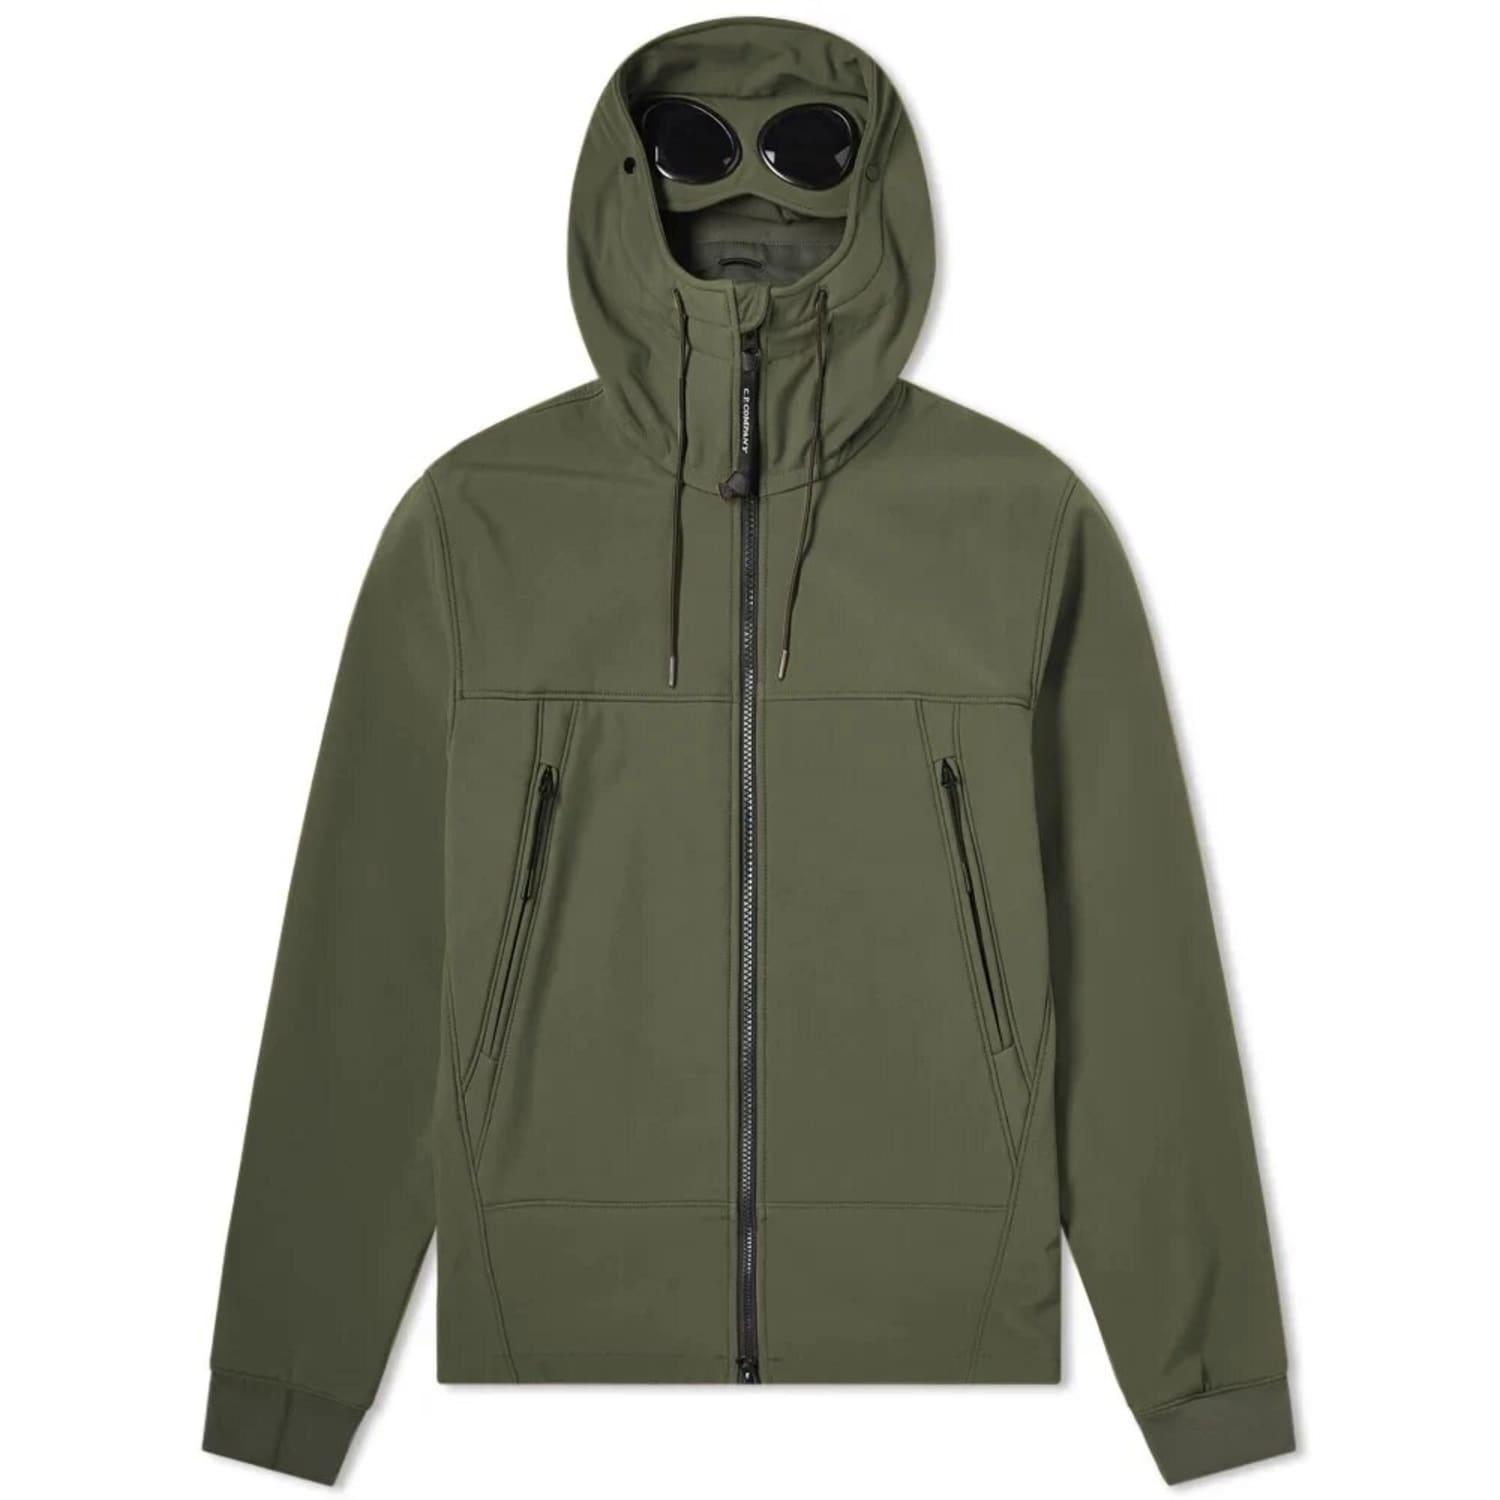 C.P. Company Shell-r Goggle Jacket 02a Ivy Green for Men | Lyst